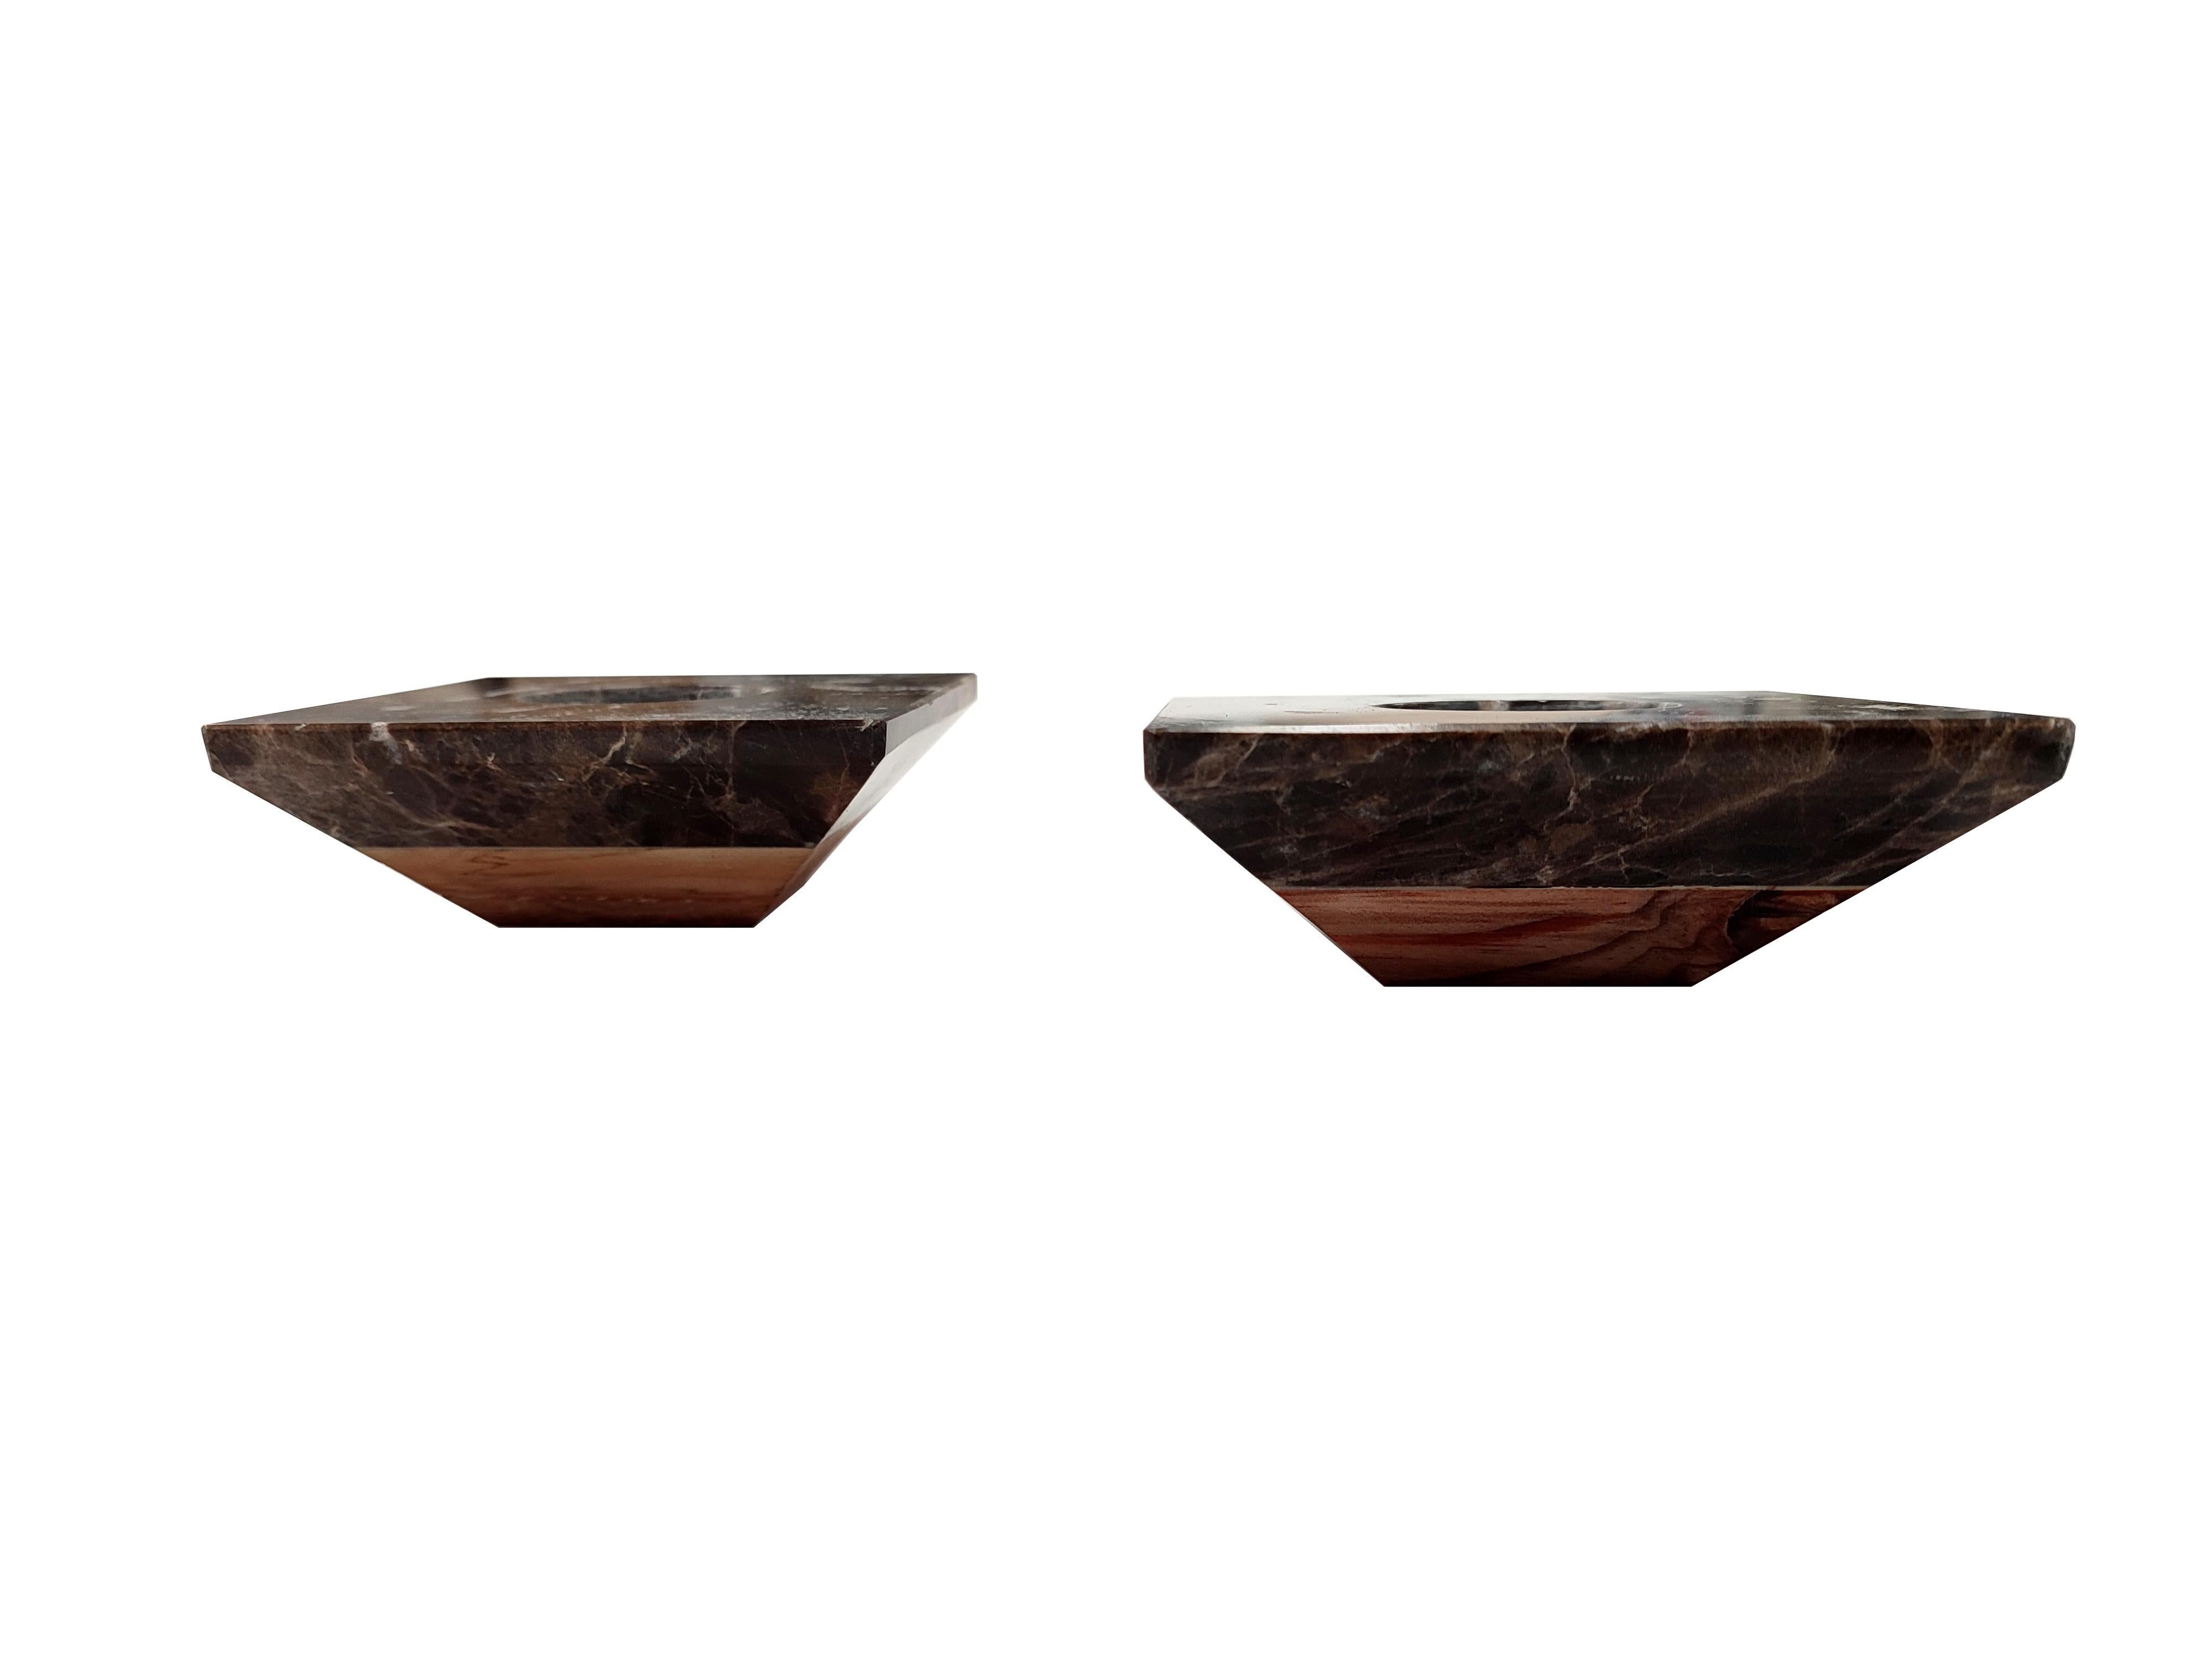 Set of Two Emperor Brown Marble Candle Holders Design Mother’s Day Gift Spain.
Set of two candle holders in marble elegant and contemporary design. A pair of candle holders with a modern design made of marble and wood. The structure of the candle